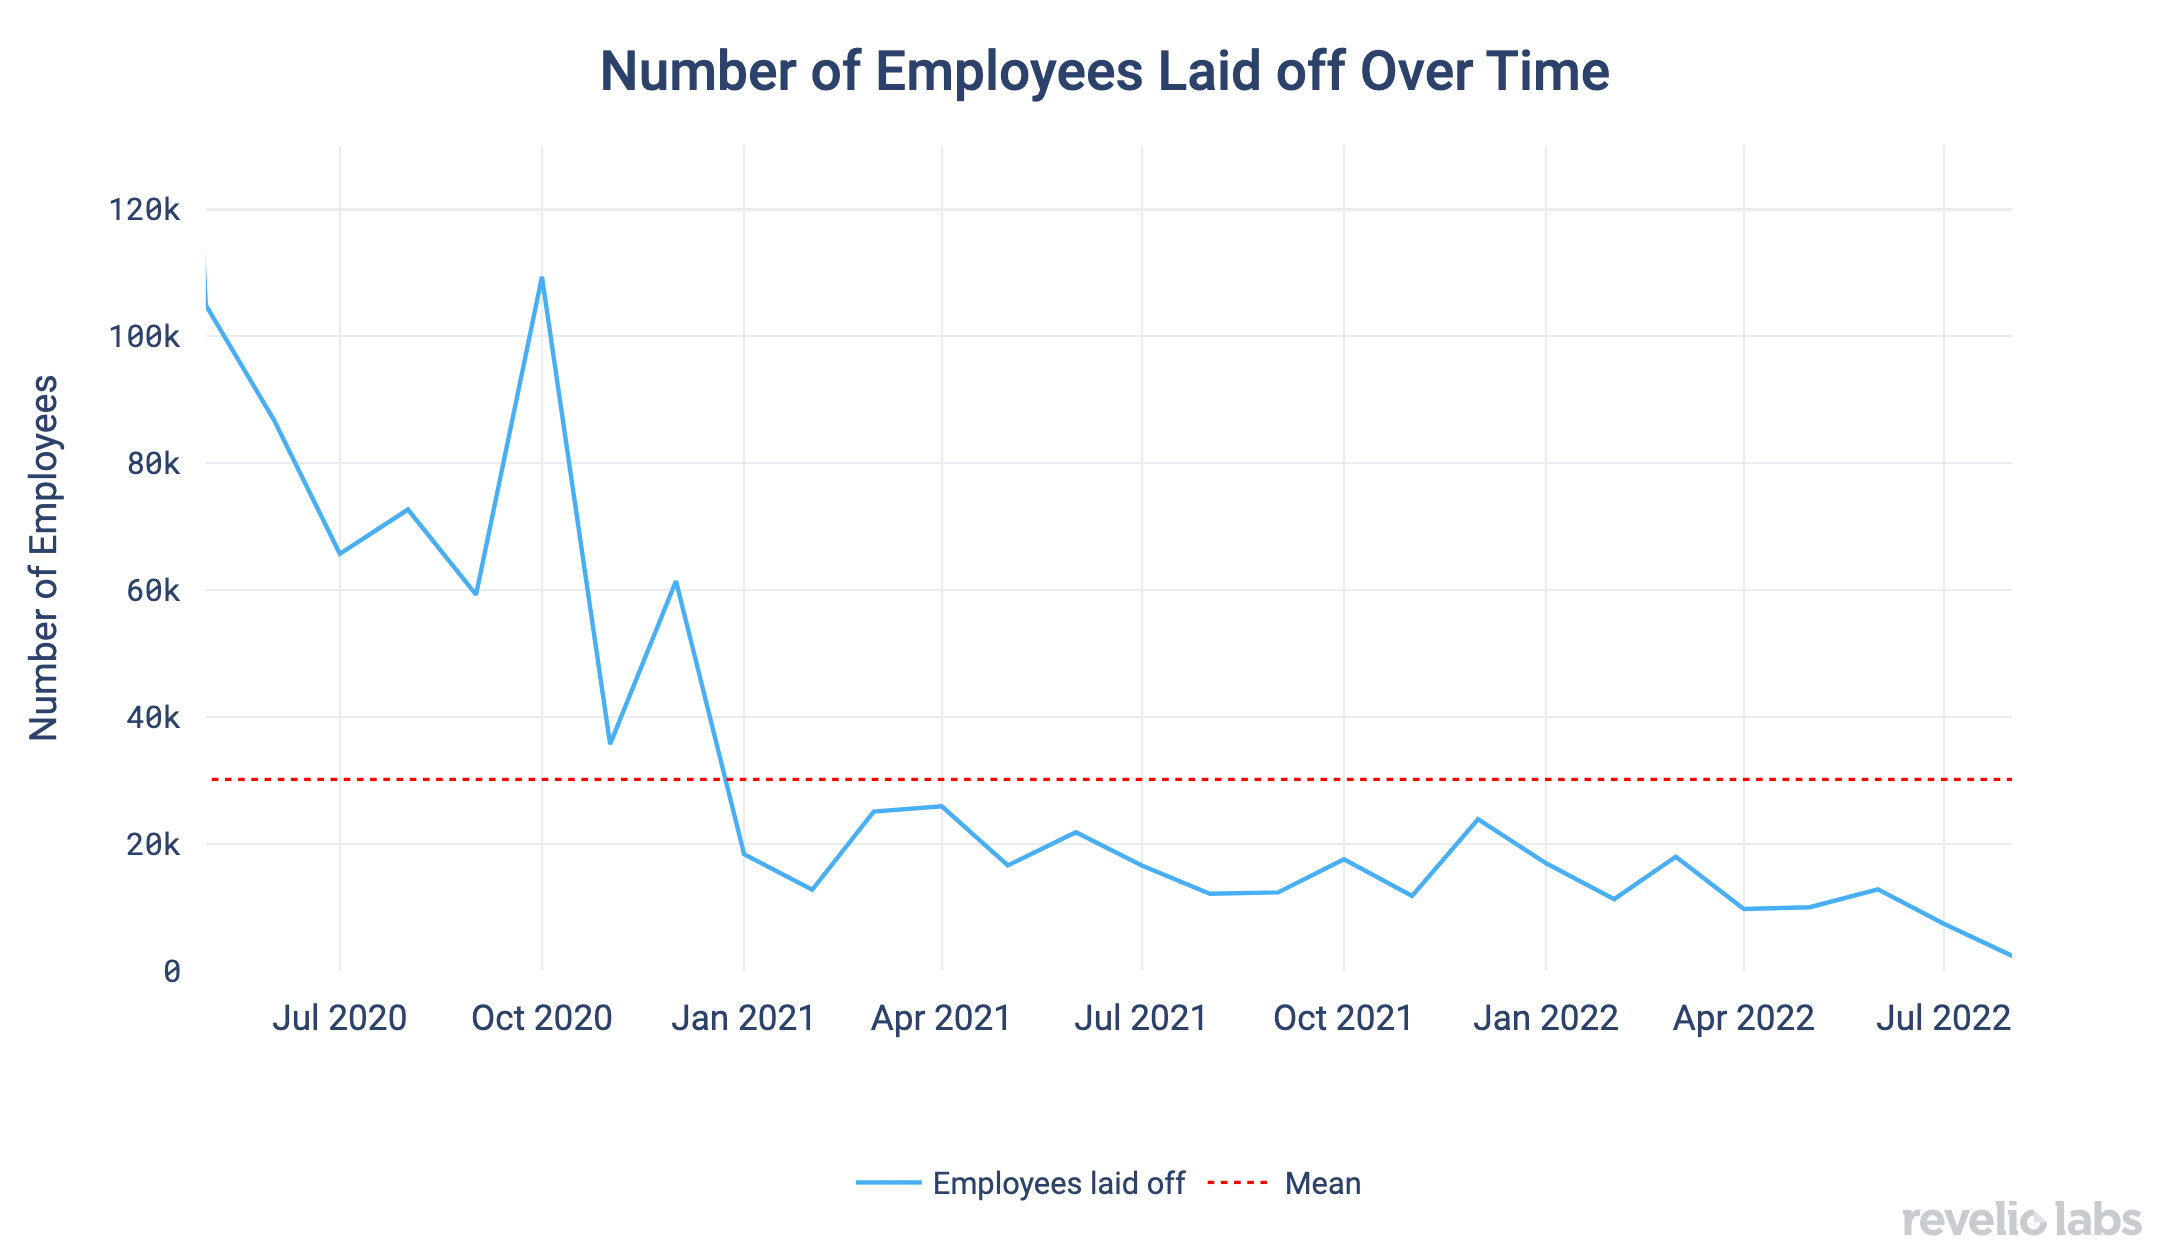 Number of Employees Laid of Over Time